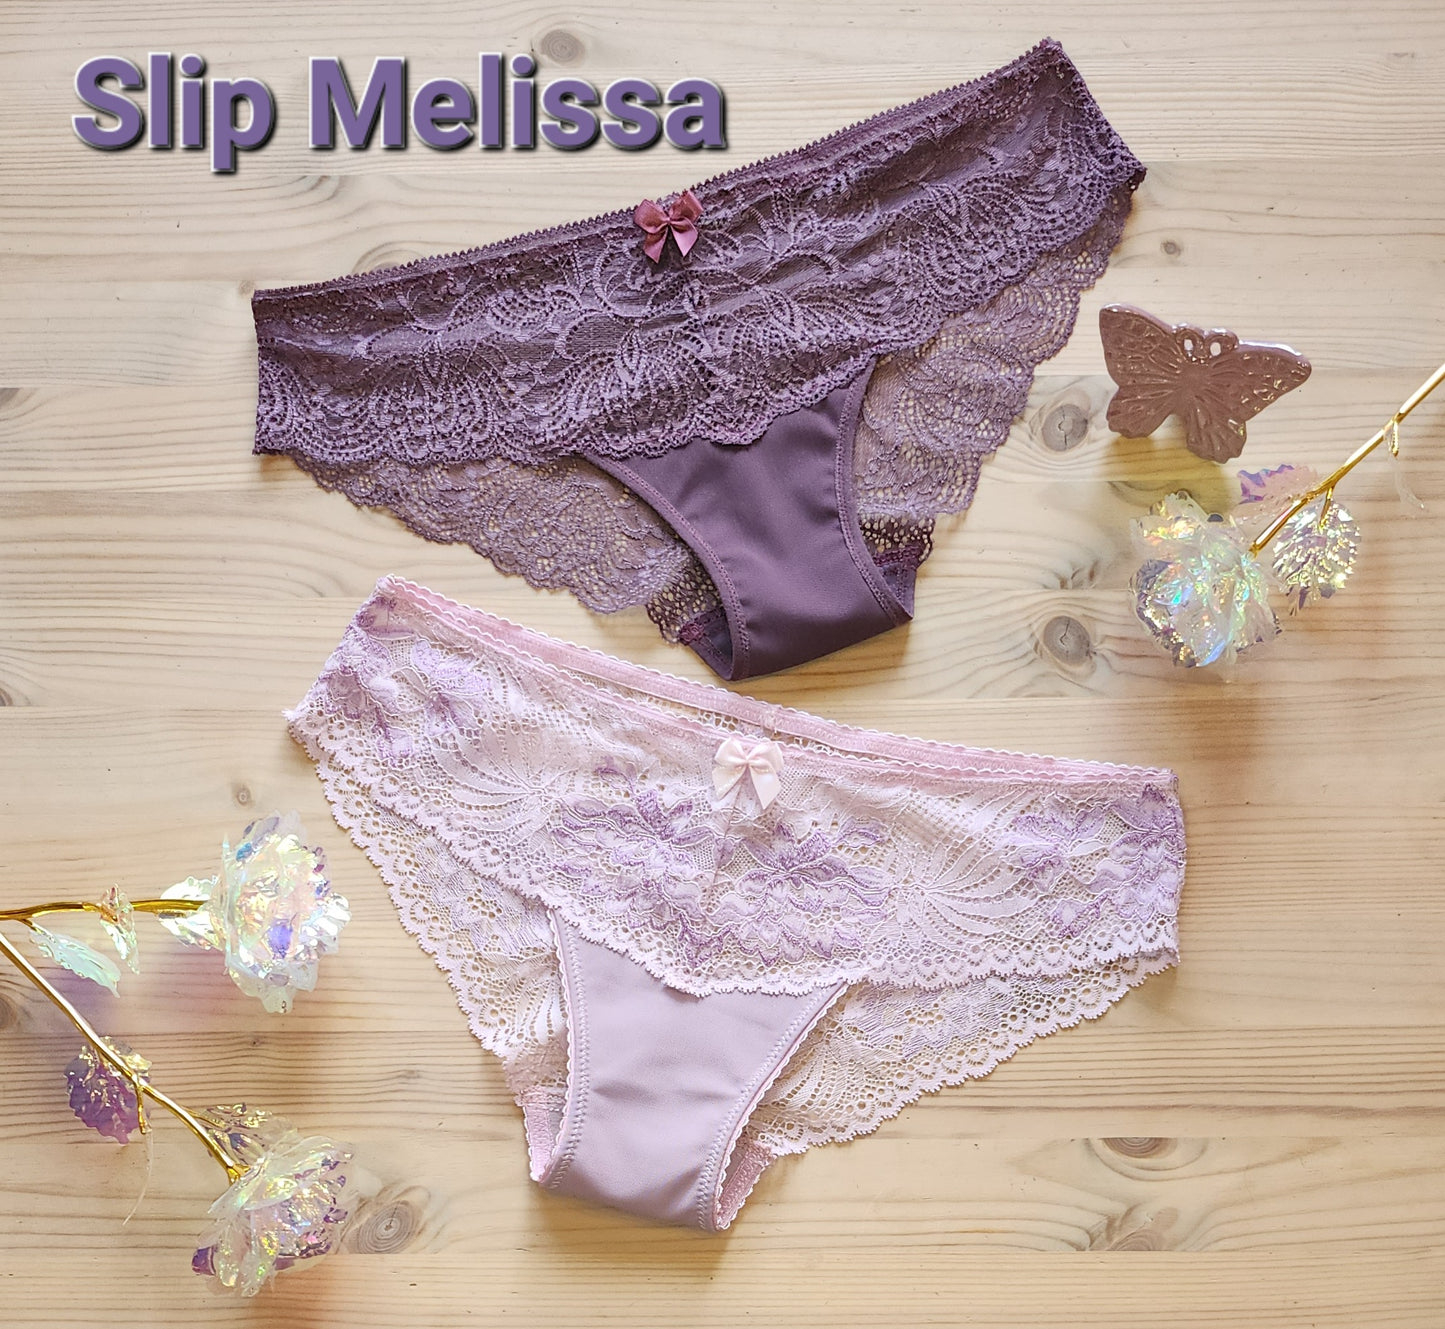 Sewing package for 2 Melissa briefs with microfiber and <tc>lace</tc> IDsnsx2